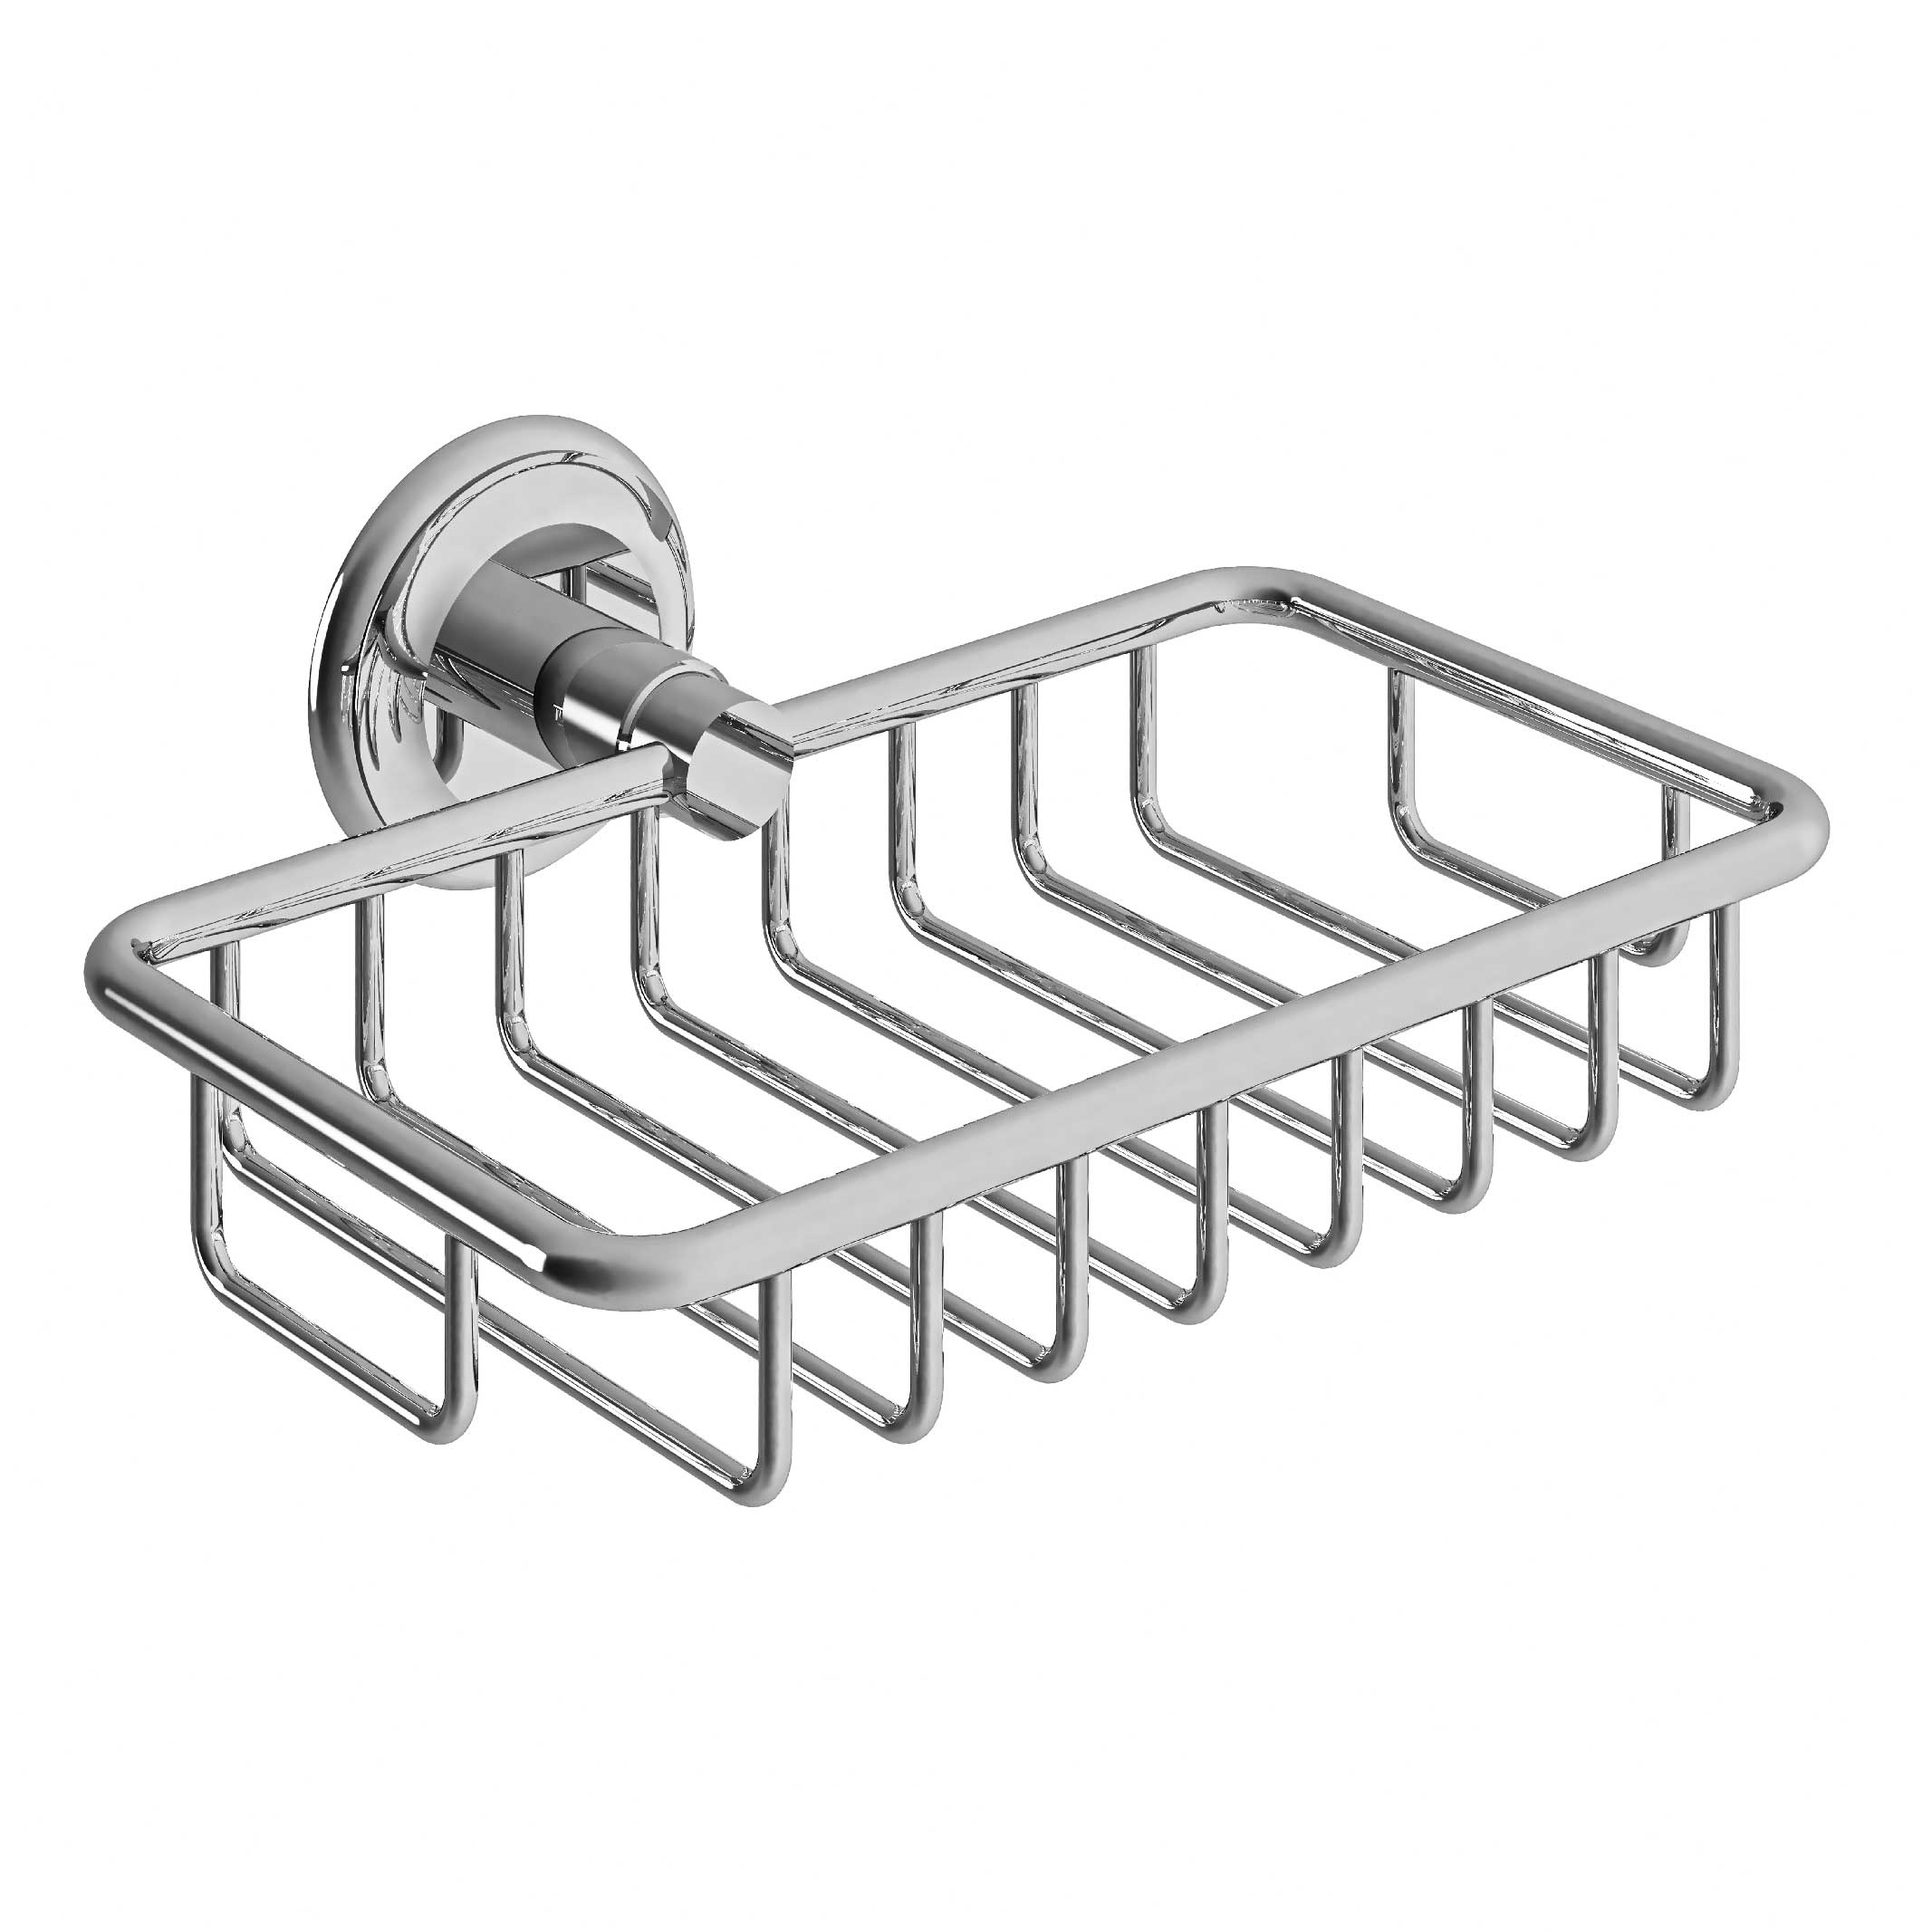 M40-519 Wall mounted shower soap holder